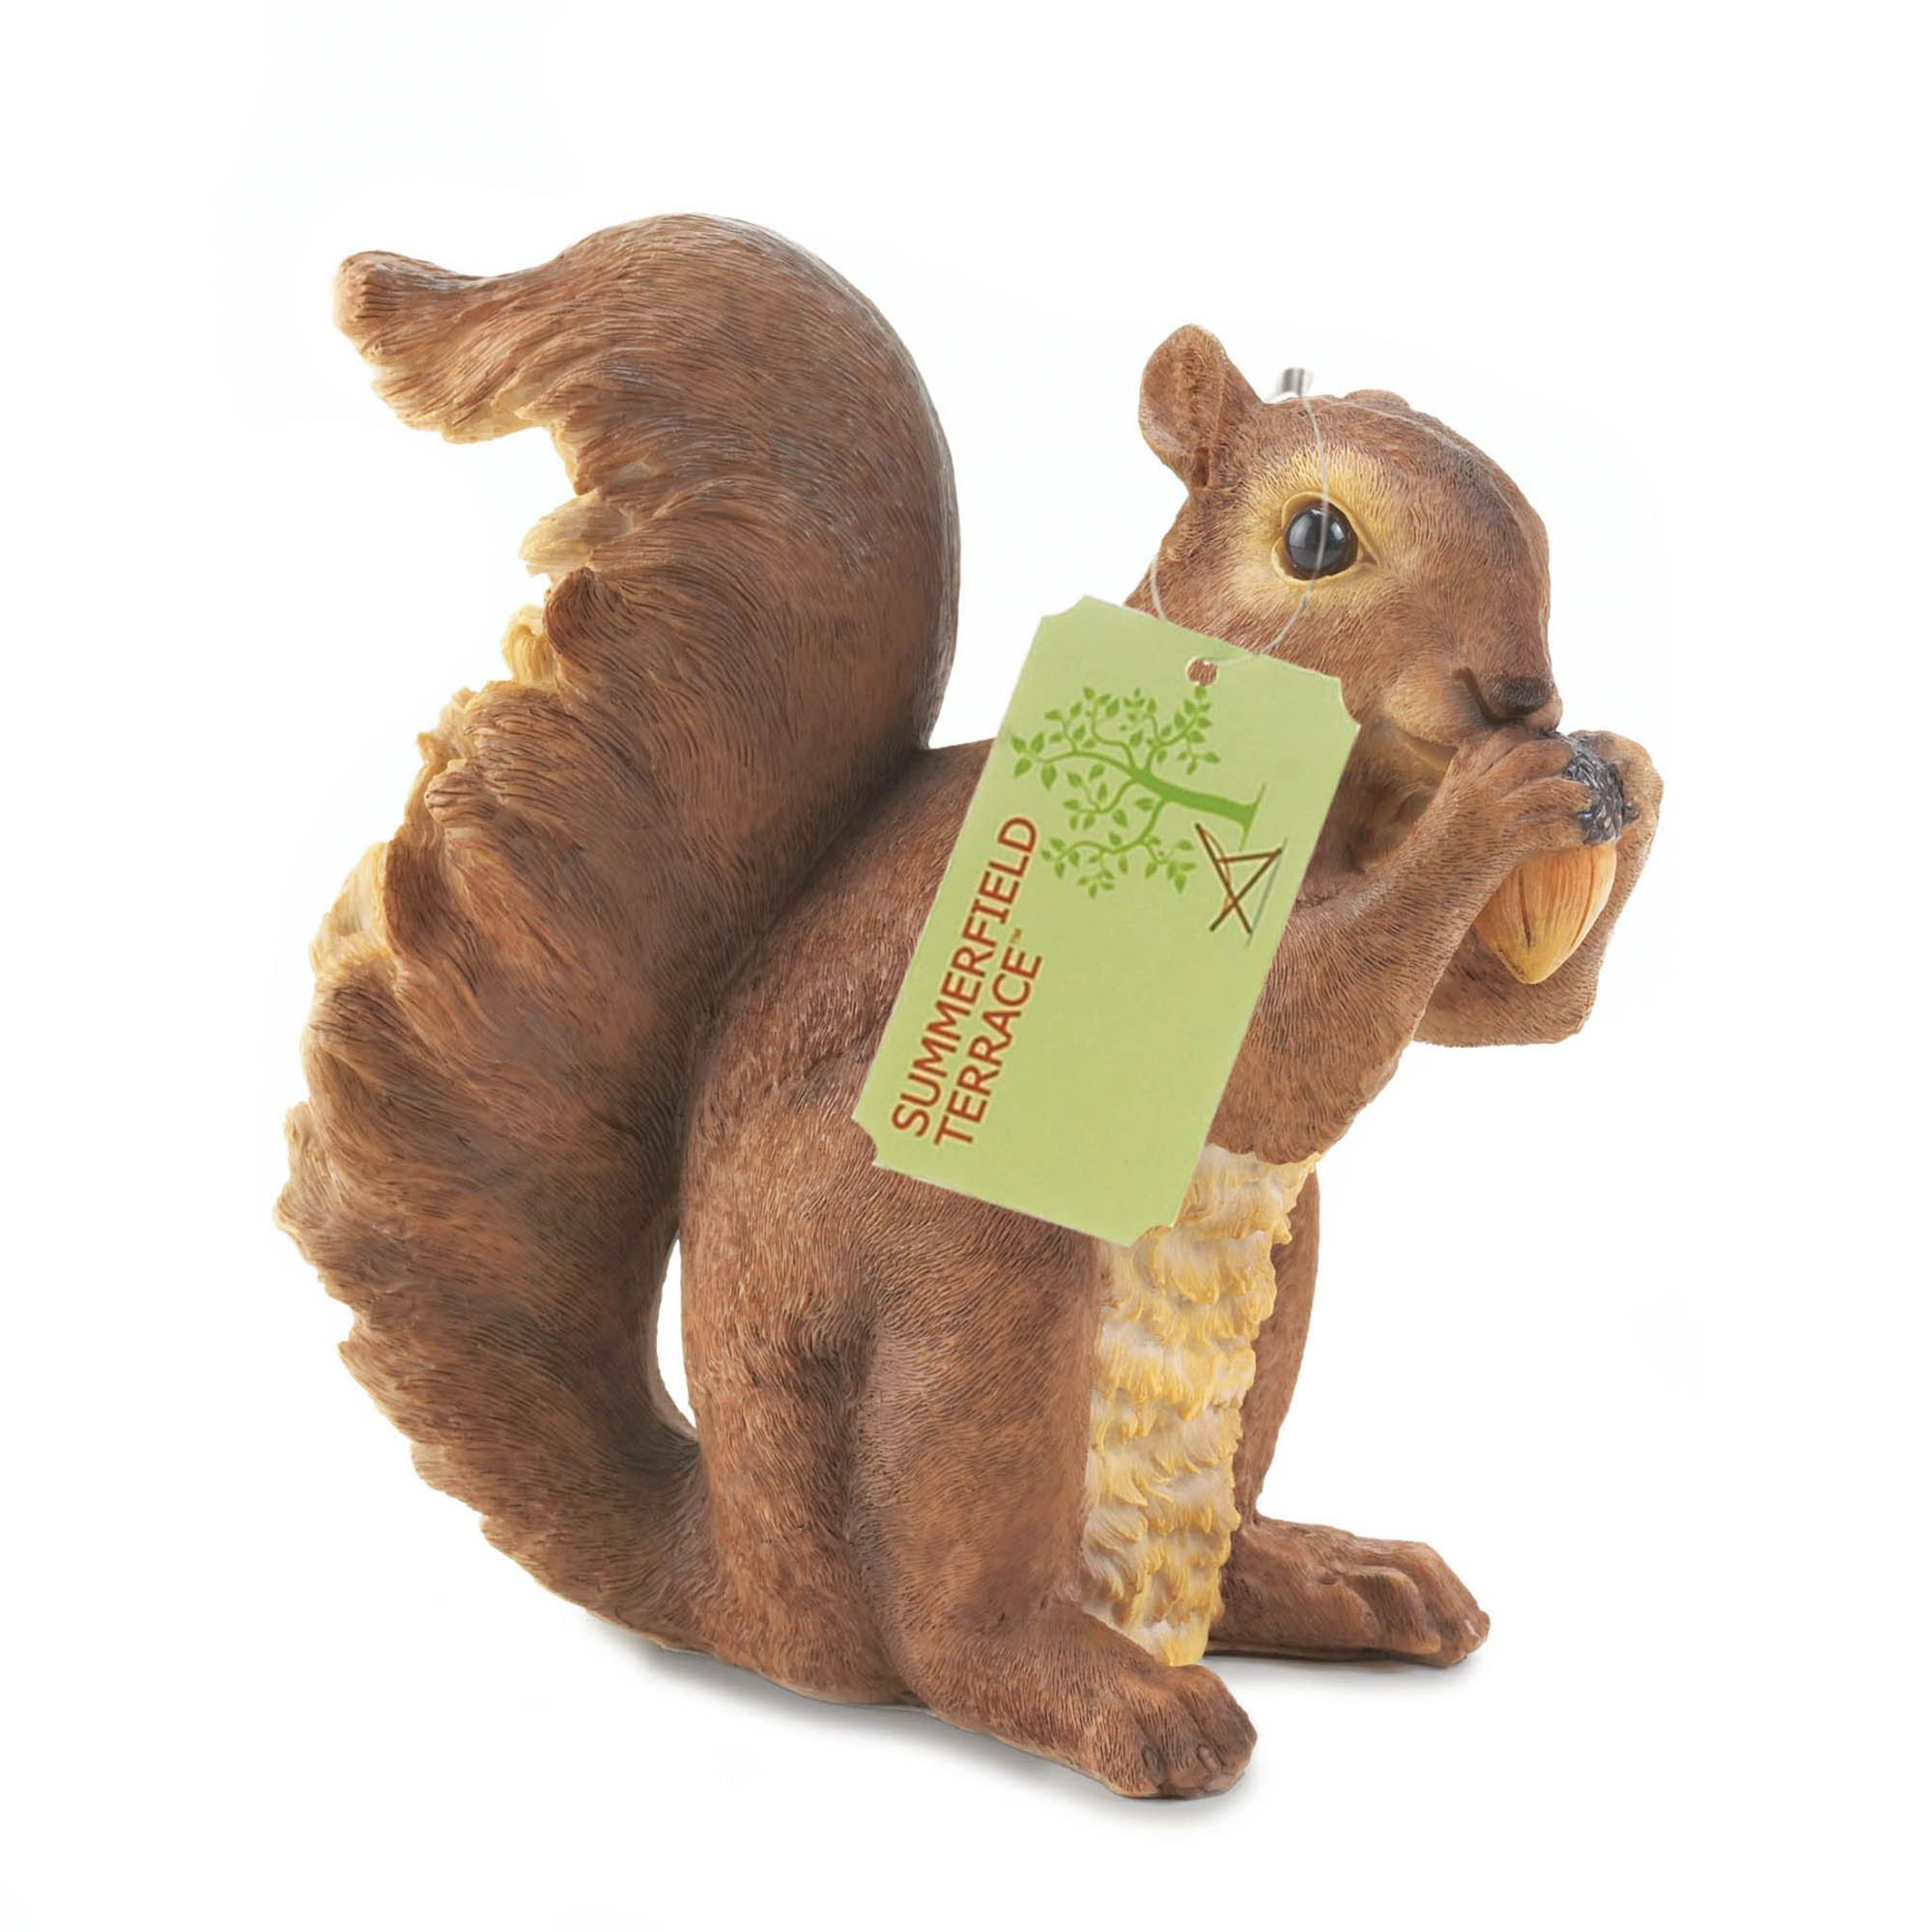 Zingz & Thingz 6.75" Brown and Beige Nibbling Squirrel Garden Statue